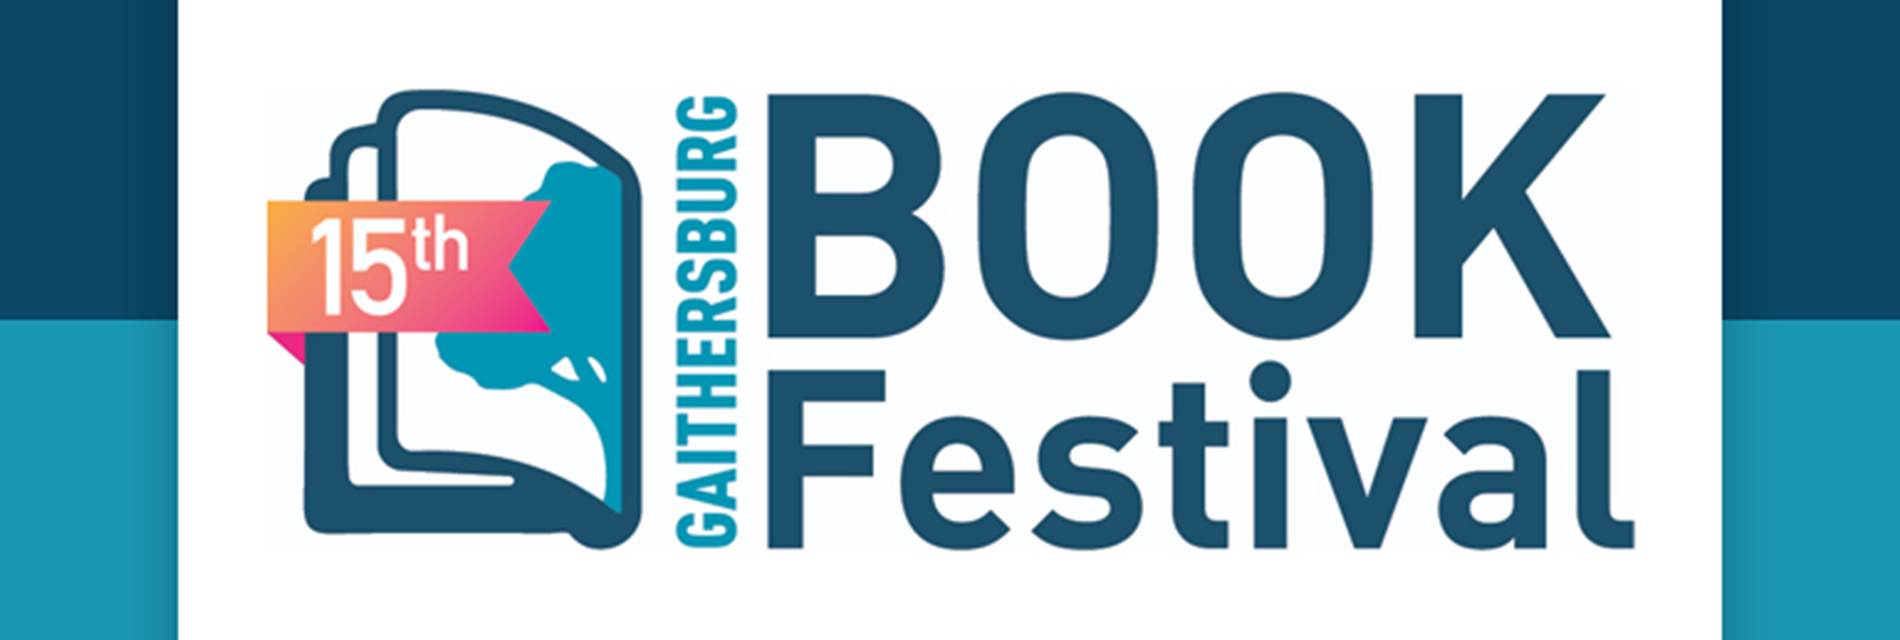 mcps-gaithersburg-book-festival homepage.png